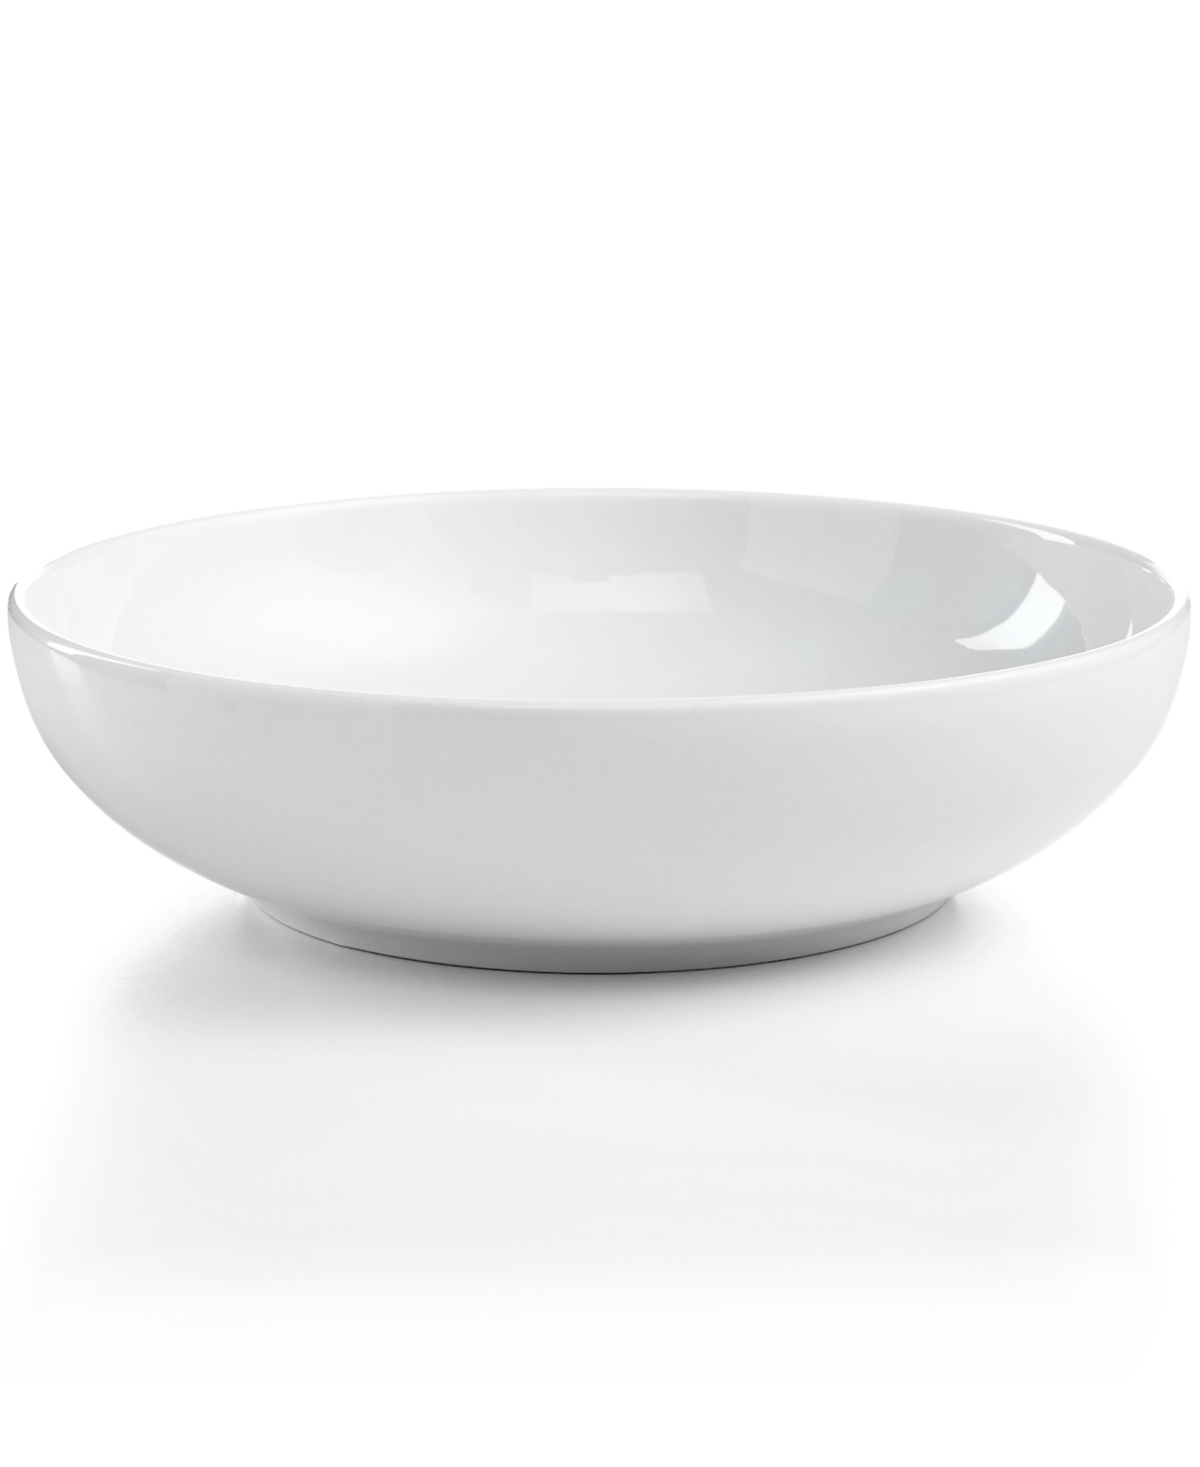 The Cellar Whiteware Coupe Pasta Bowl, Created for Macy's